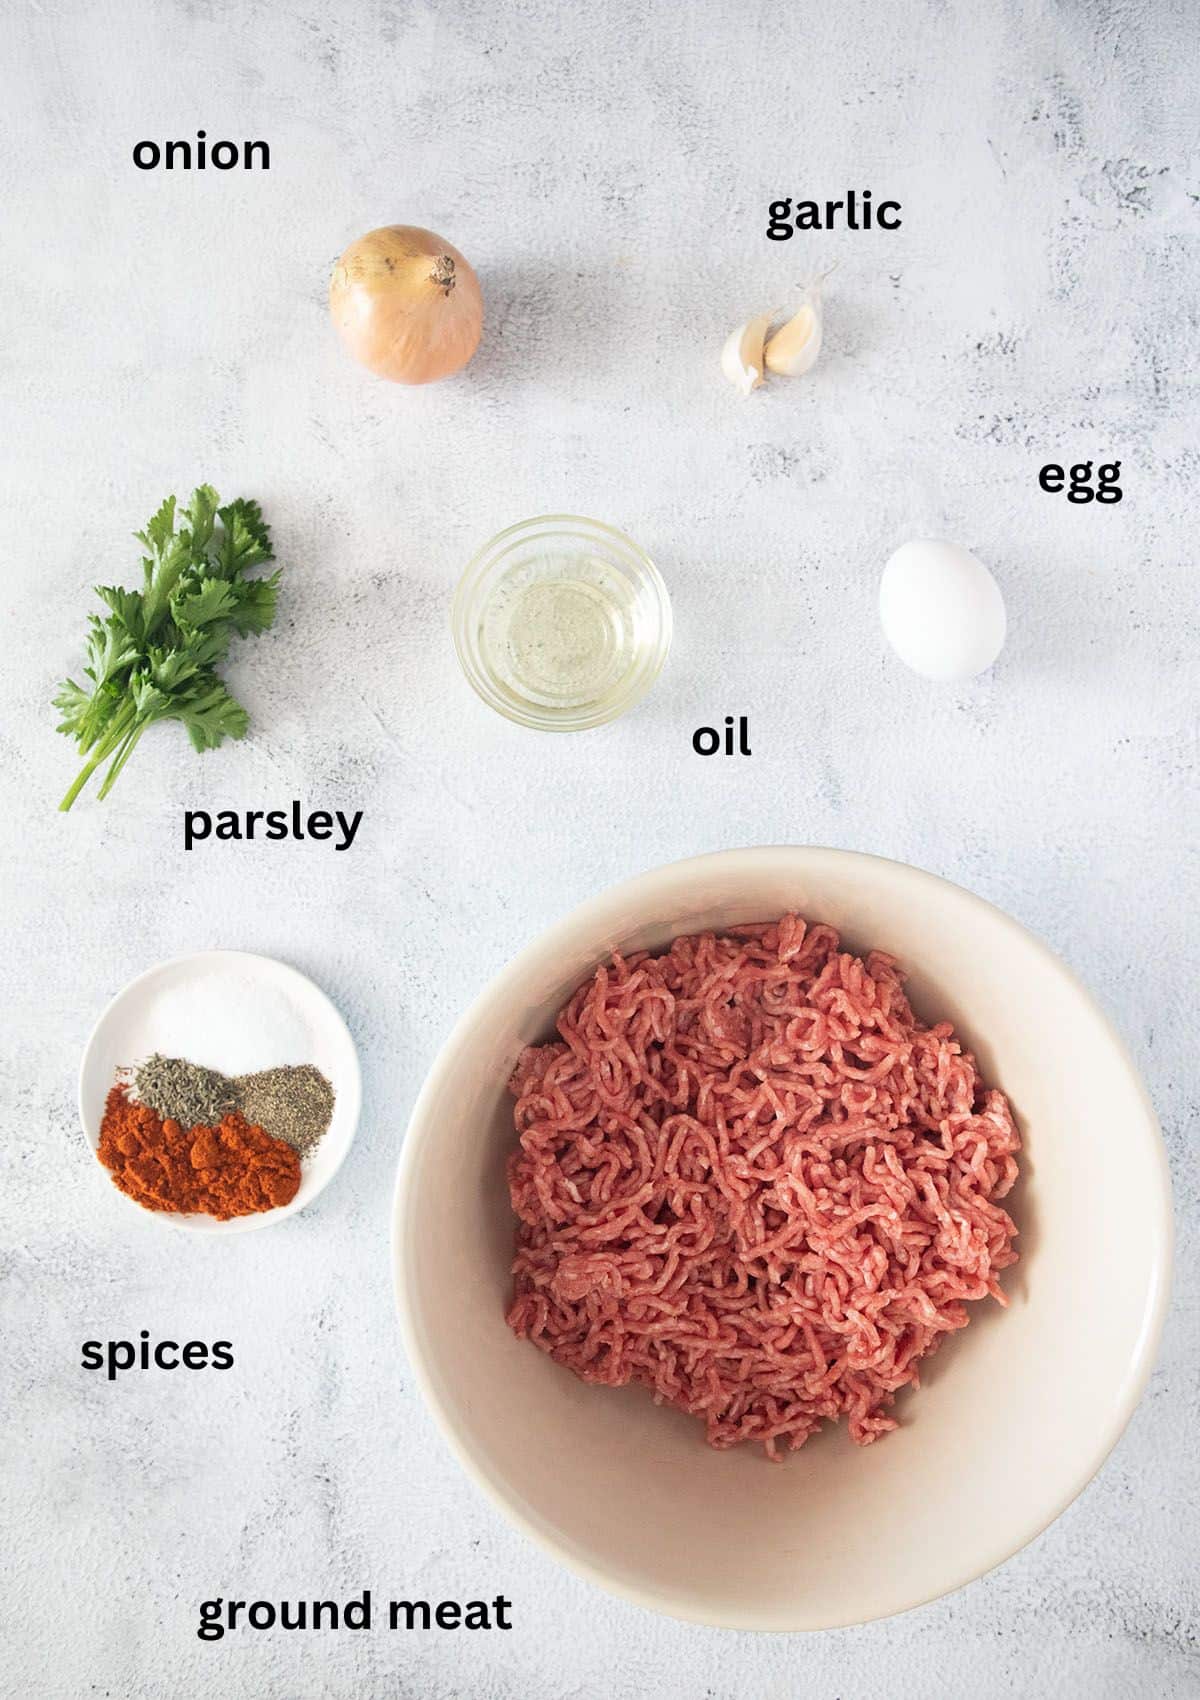 labeled ingredients for making meatballs.